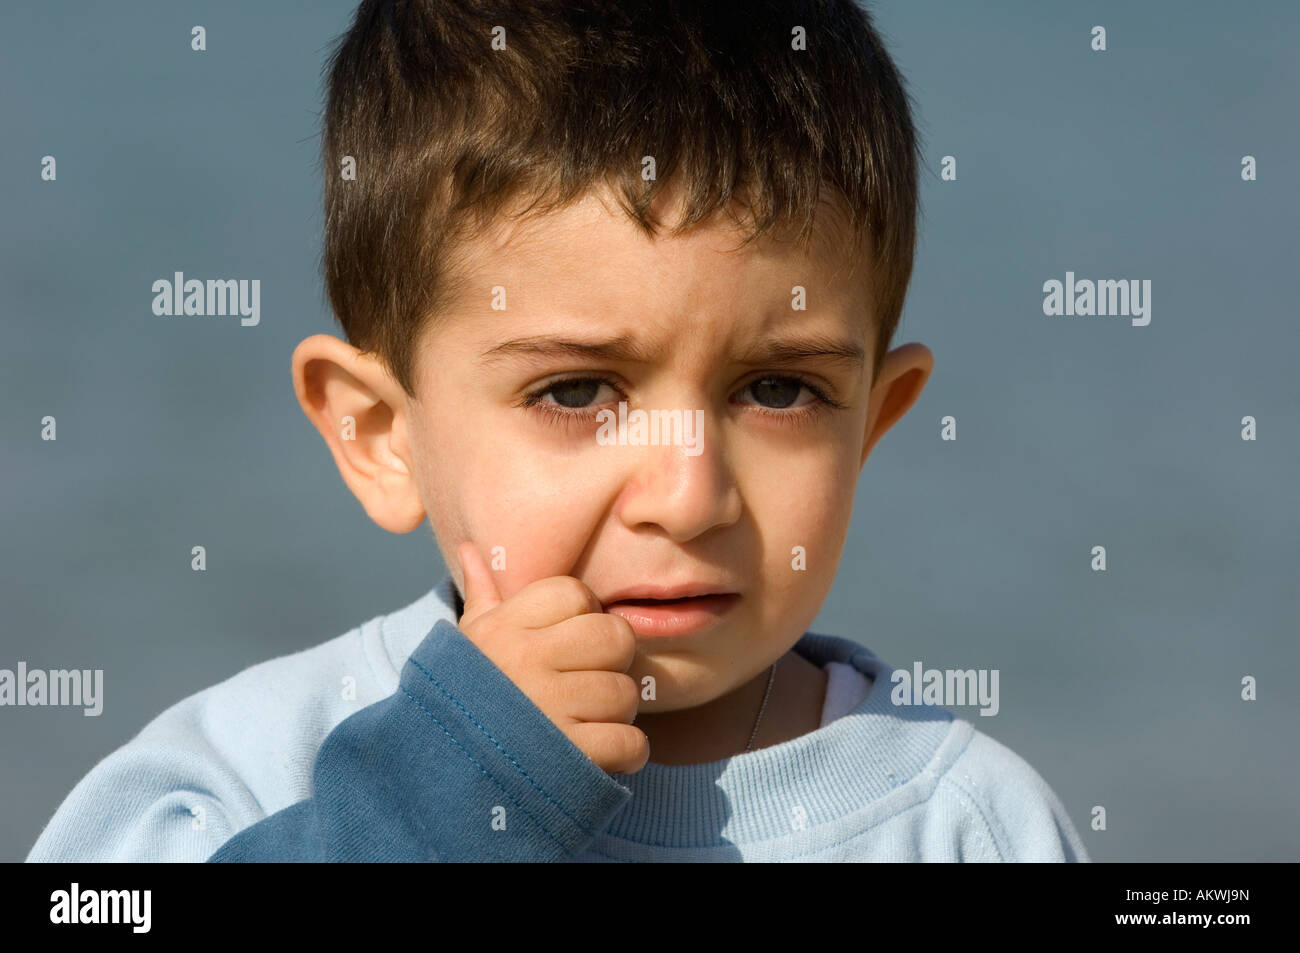 baby boy crying hand on mouth Stock Photo